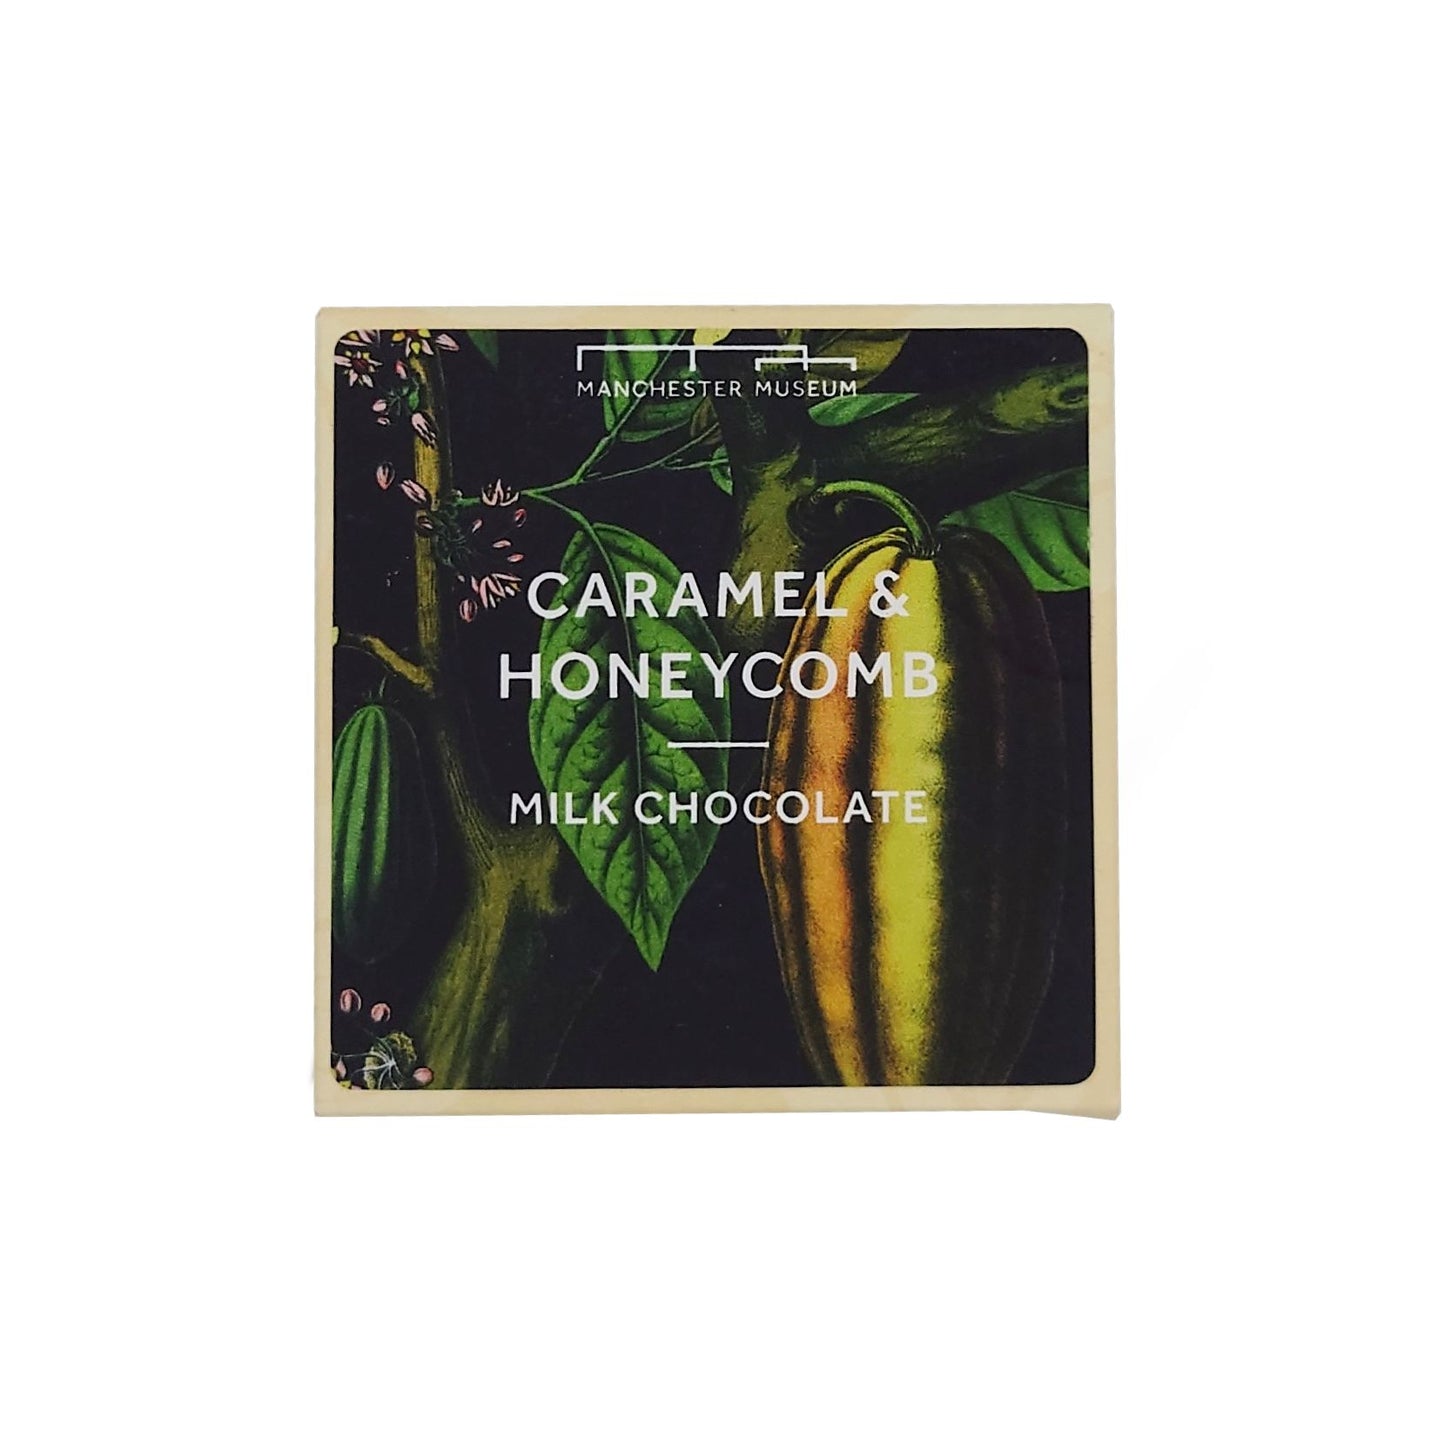 Caramel and honeycomb chocolate square box with a cacao tree and fruit illustration. White text: caramel & honeycomb, milk chocolate.